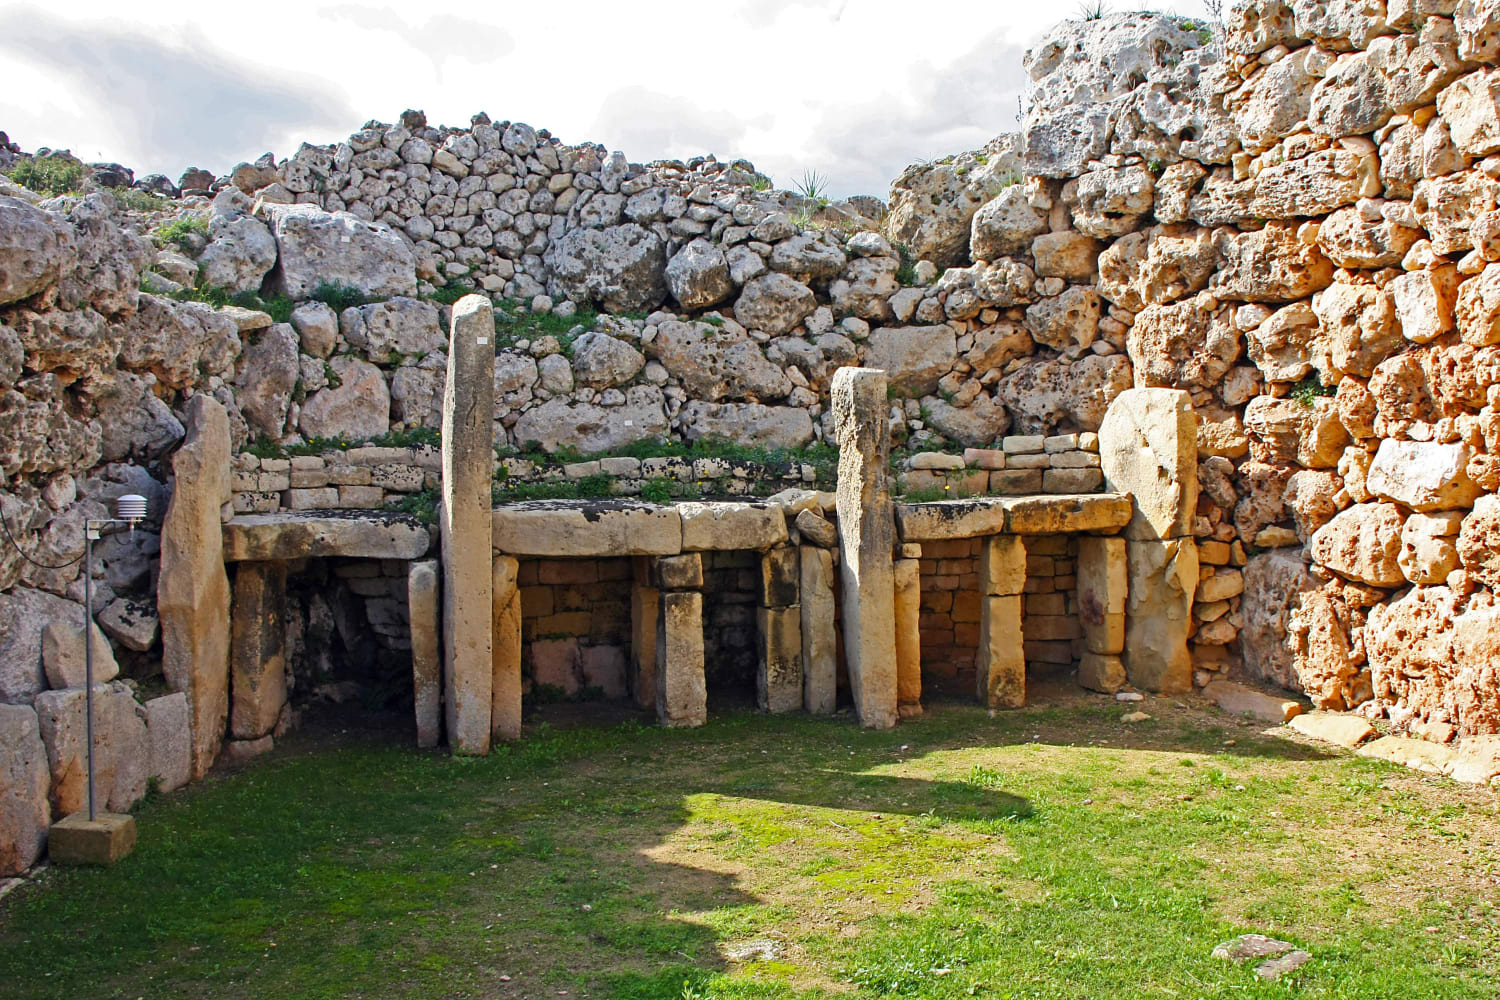 Ġgantija Temples, a megalithic temple complex from the Neolithic on the Mediterranean island of Gozo, Malta. They are older than the pyramids of Egypt, and date to around 3600 BC, which also makes them the world's second oldest manmade religious structures.